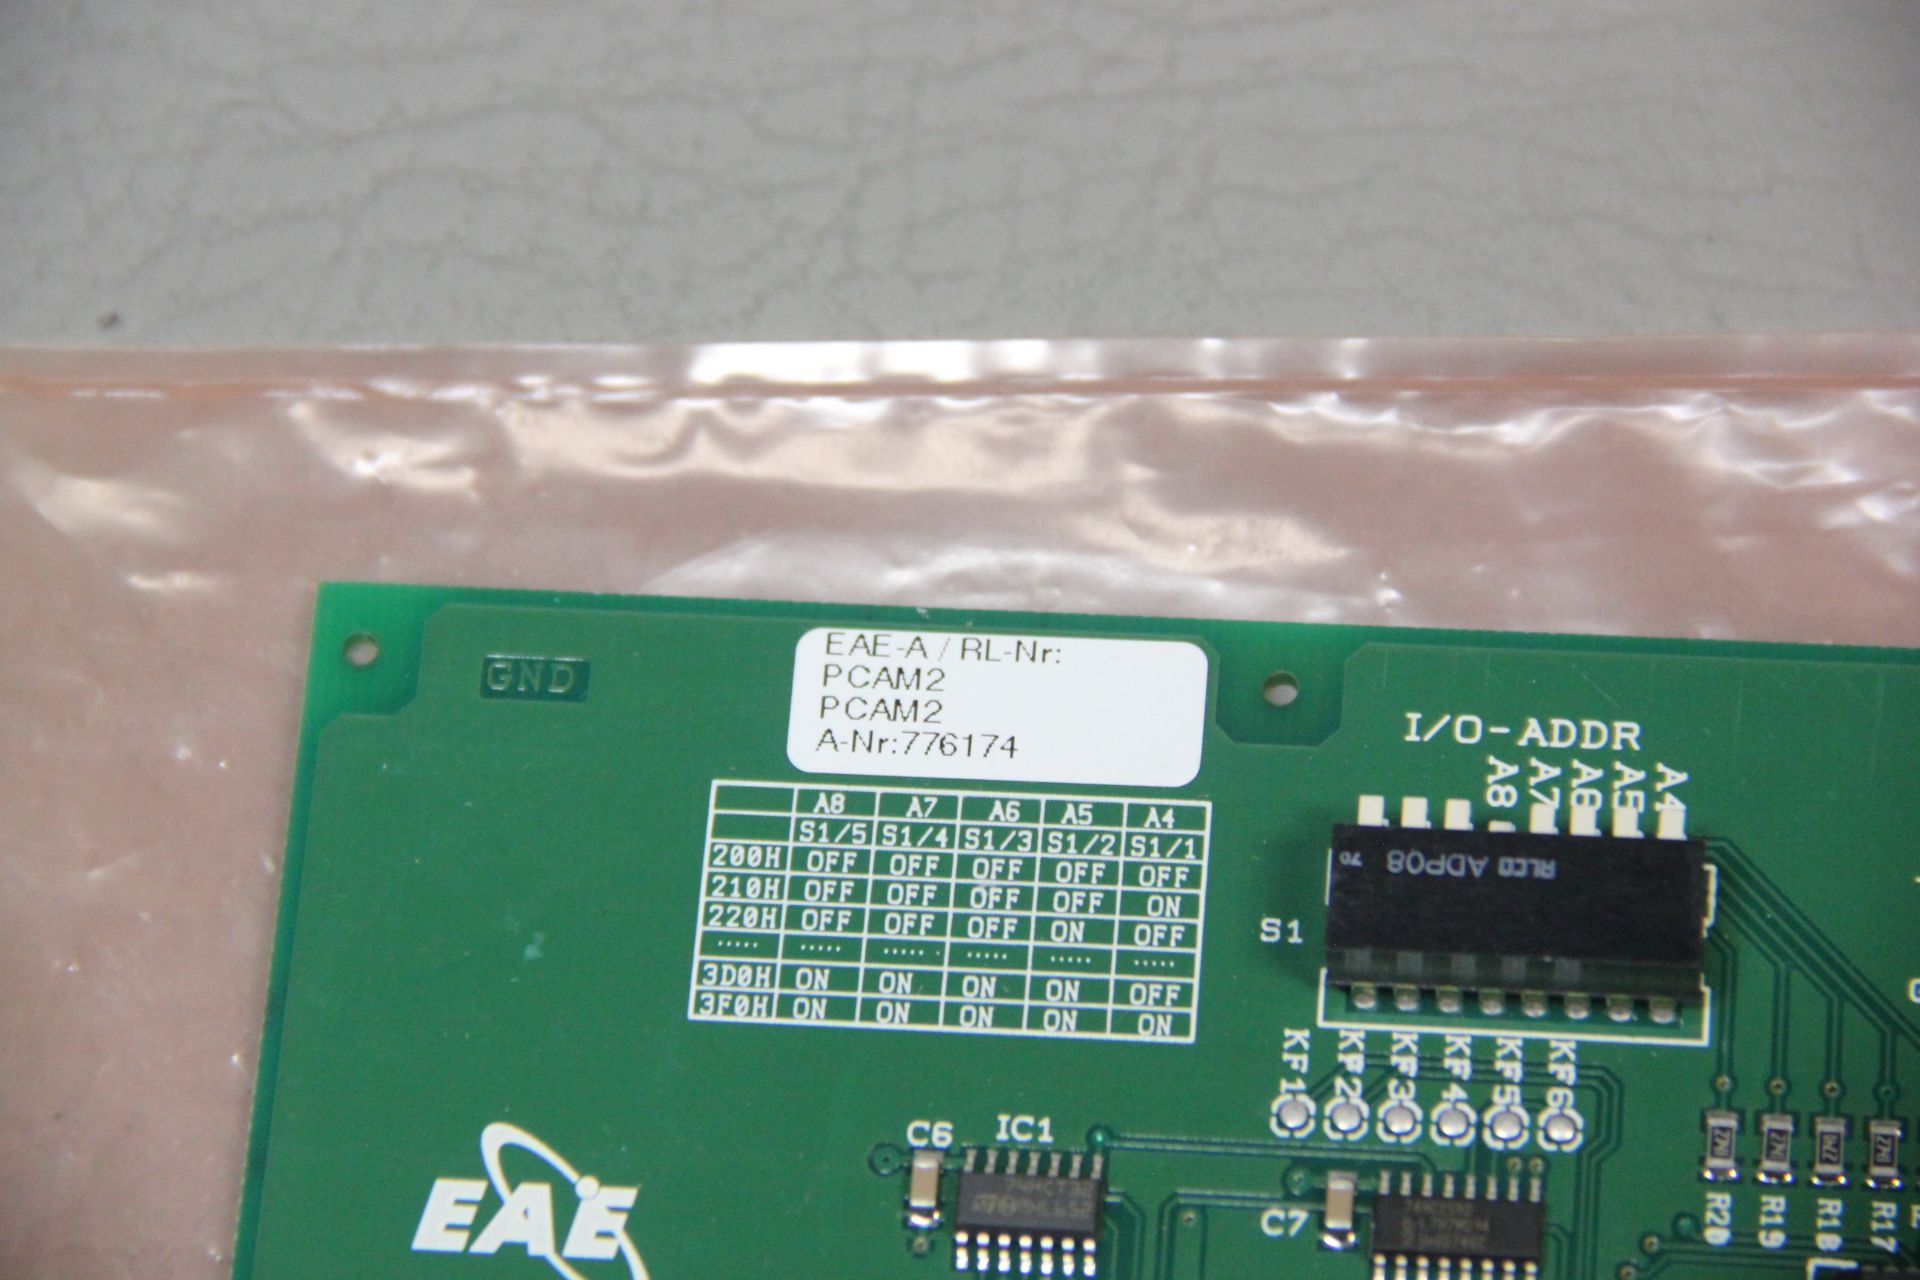 NEW EAE PCAM2 ARCNET MONITOR ISA CARD - Image 5 of 6